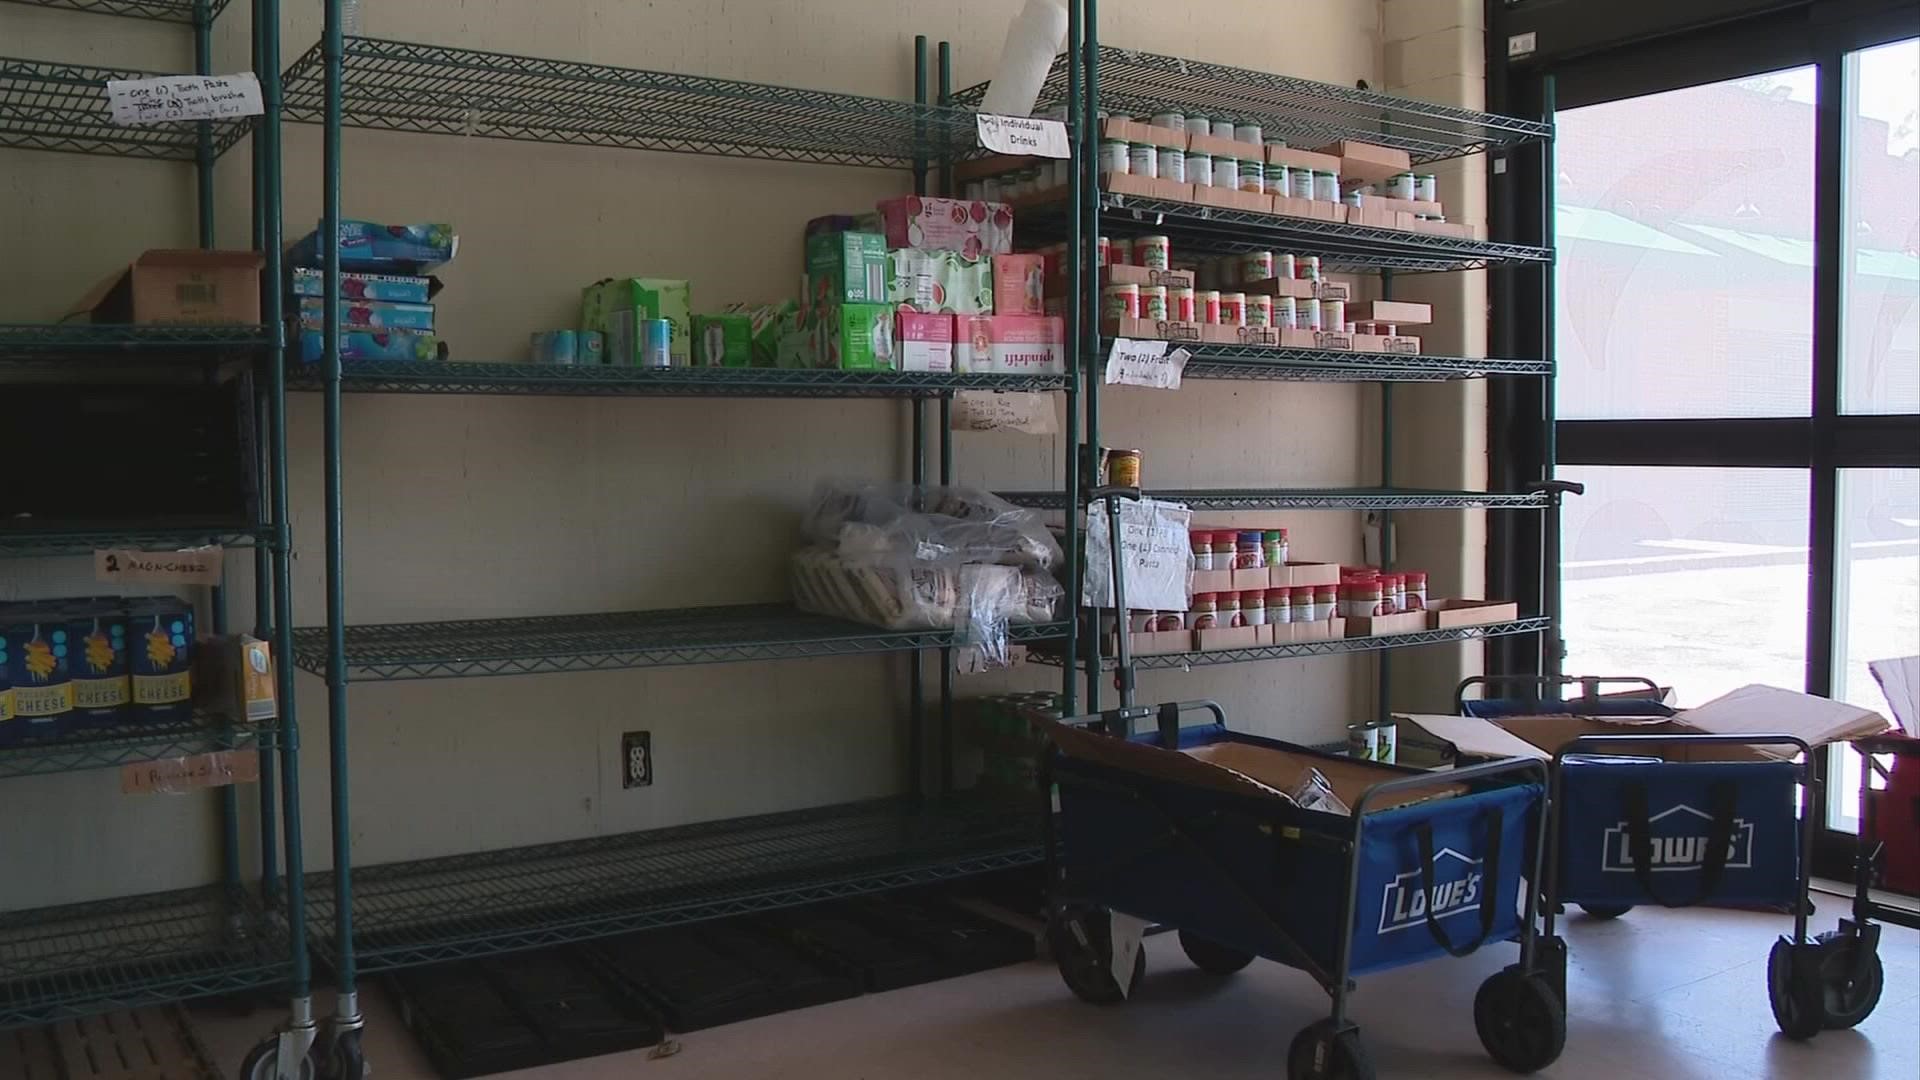 The Mid-Ohio Food Collective sent a letter to two food pantries saying they would not be able to supply smaller pantries at the same level as they have in the past.